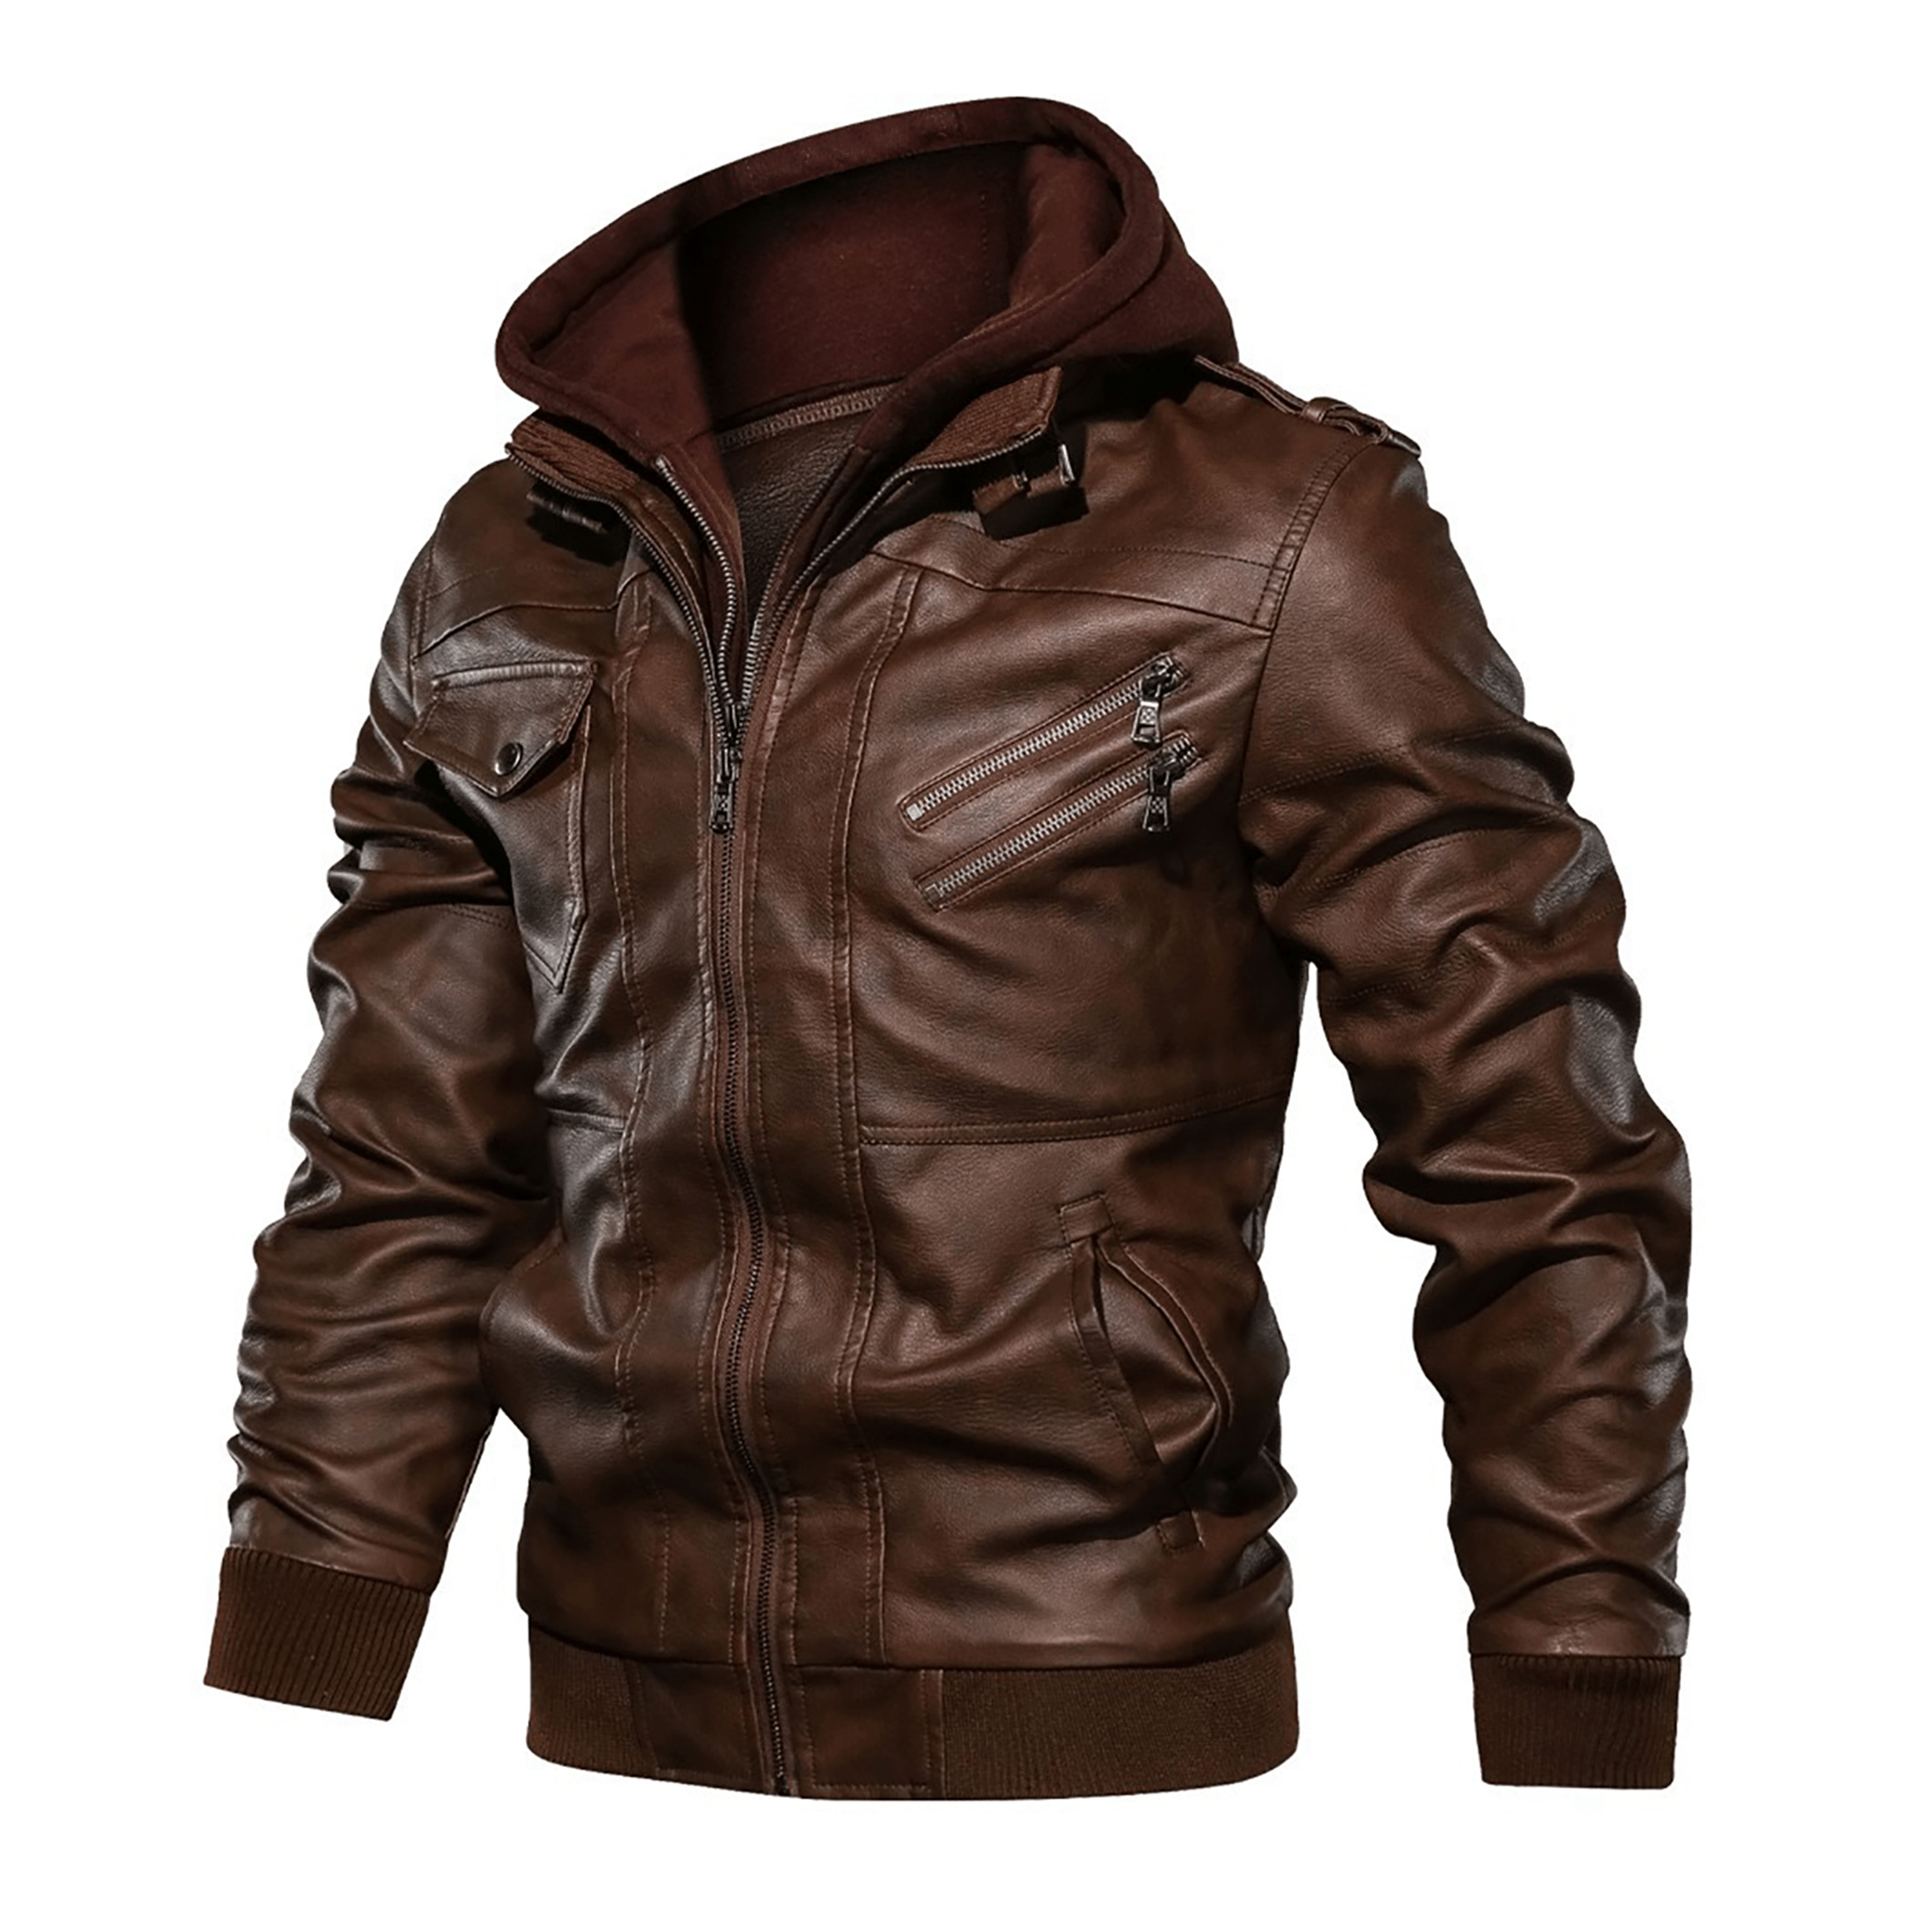 Top leather jackets and latest products 331